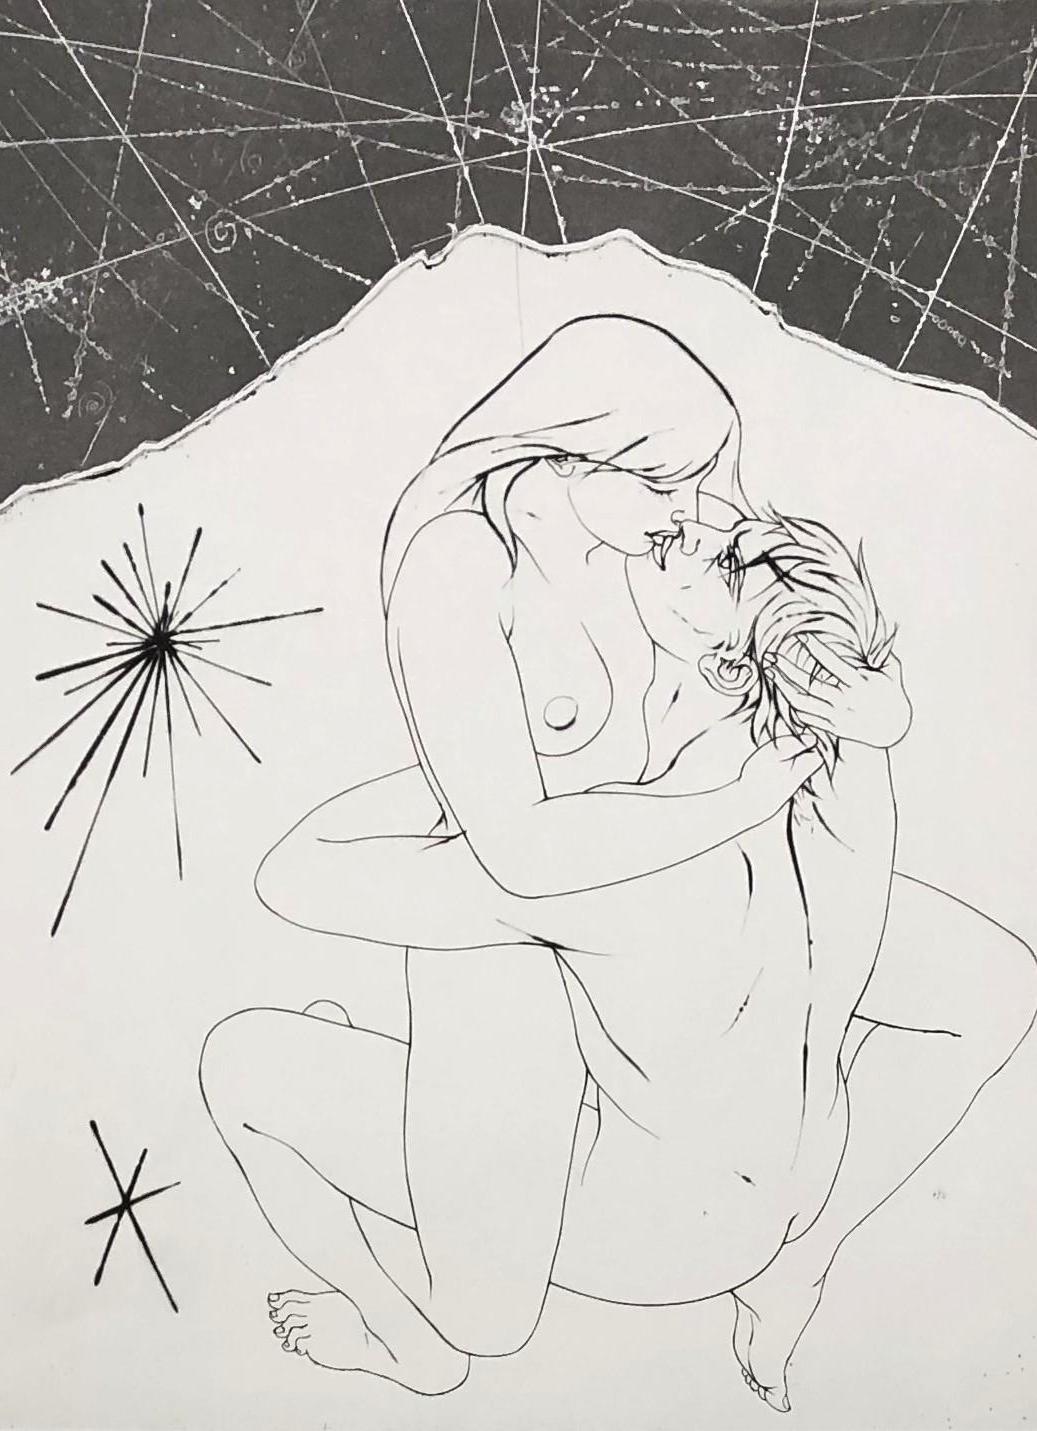 Beautiful Woman on a Man - Original etching handsigned and numbered - Print by Pierre-Yves Trémois